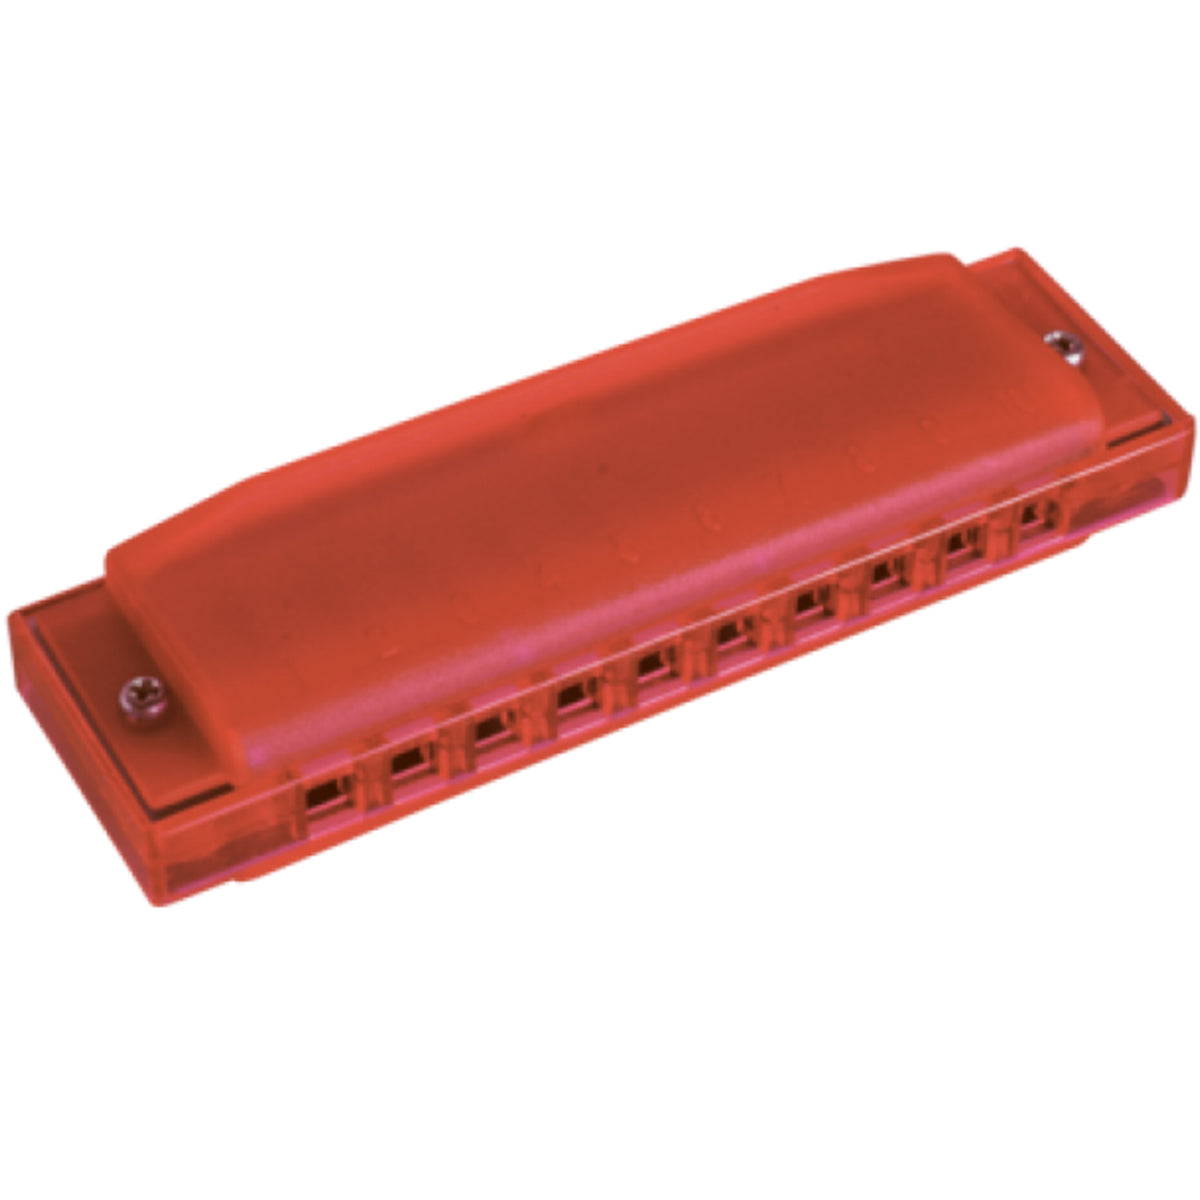 Hohner M91.600 Happy Color Harmonica Red Colour - Key of C